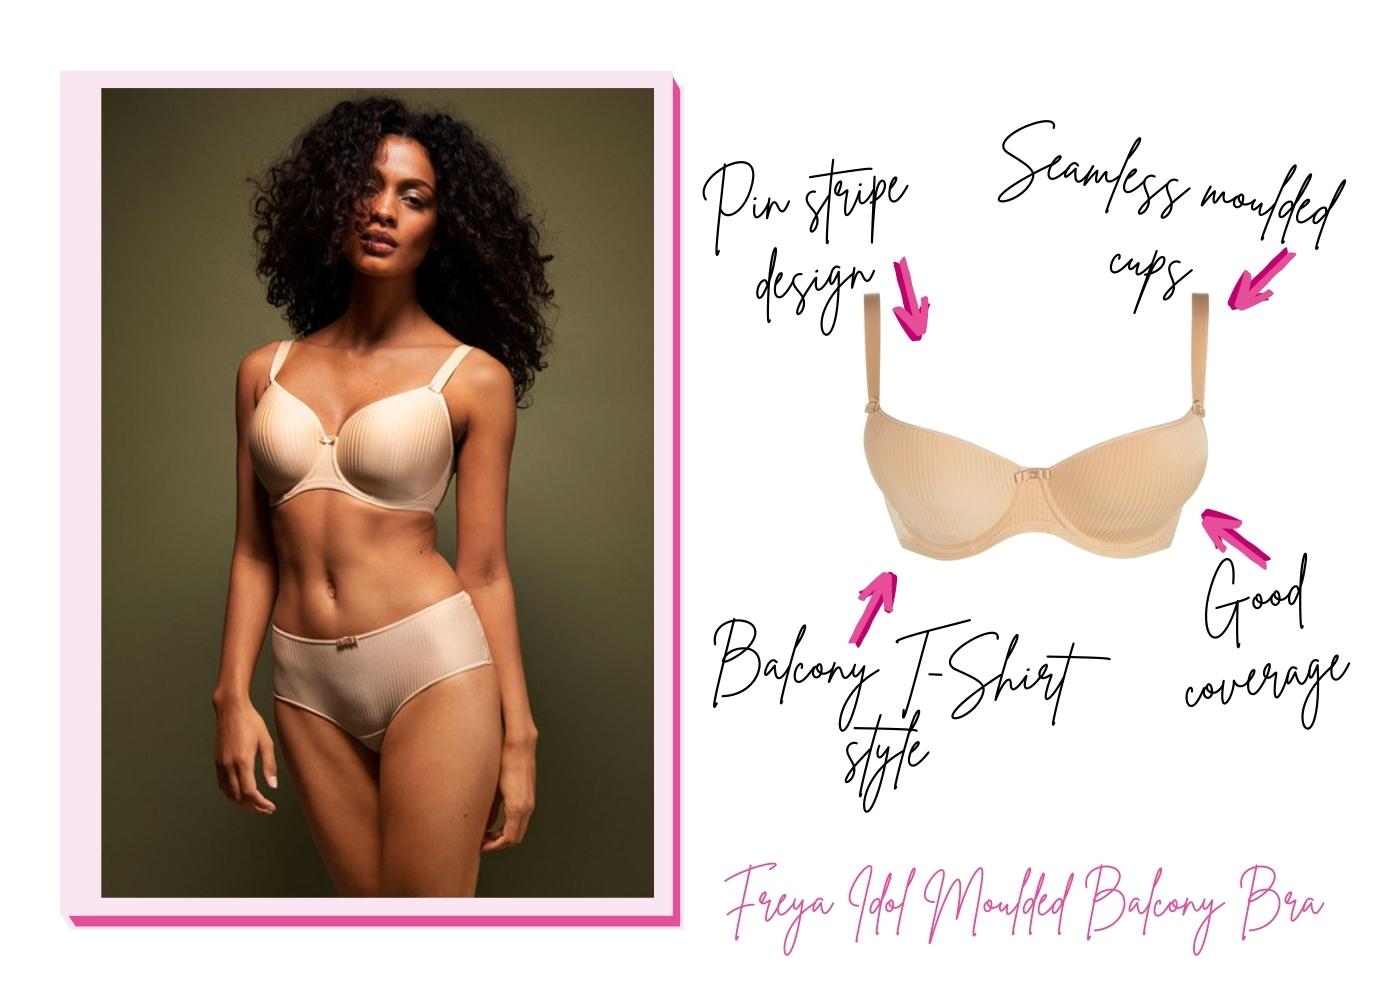 The Smallest Bra Size? All You Need To Know